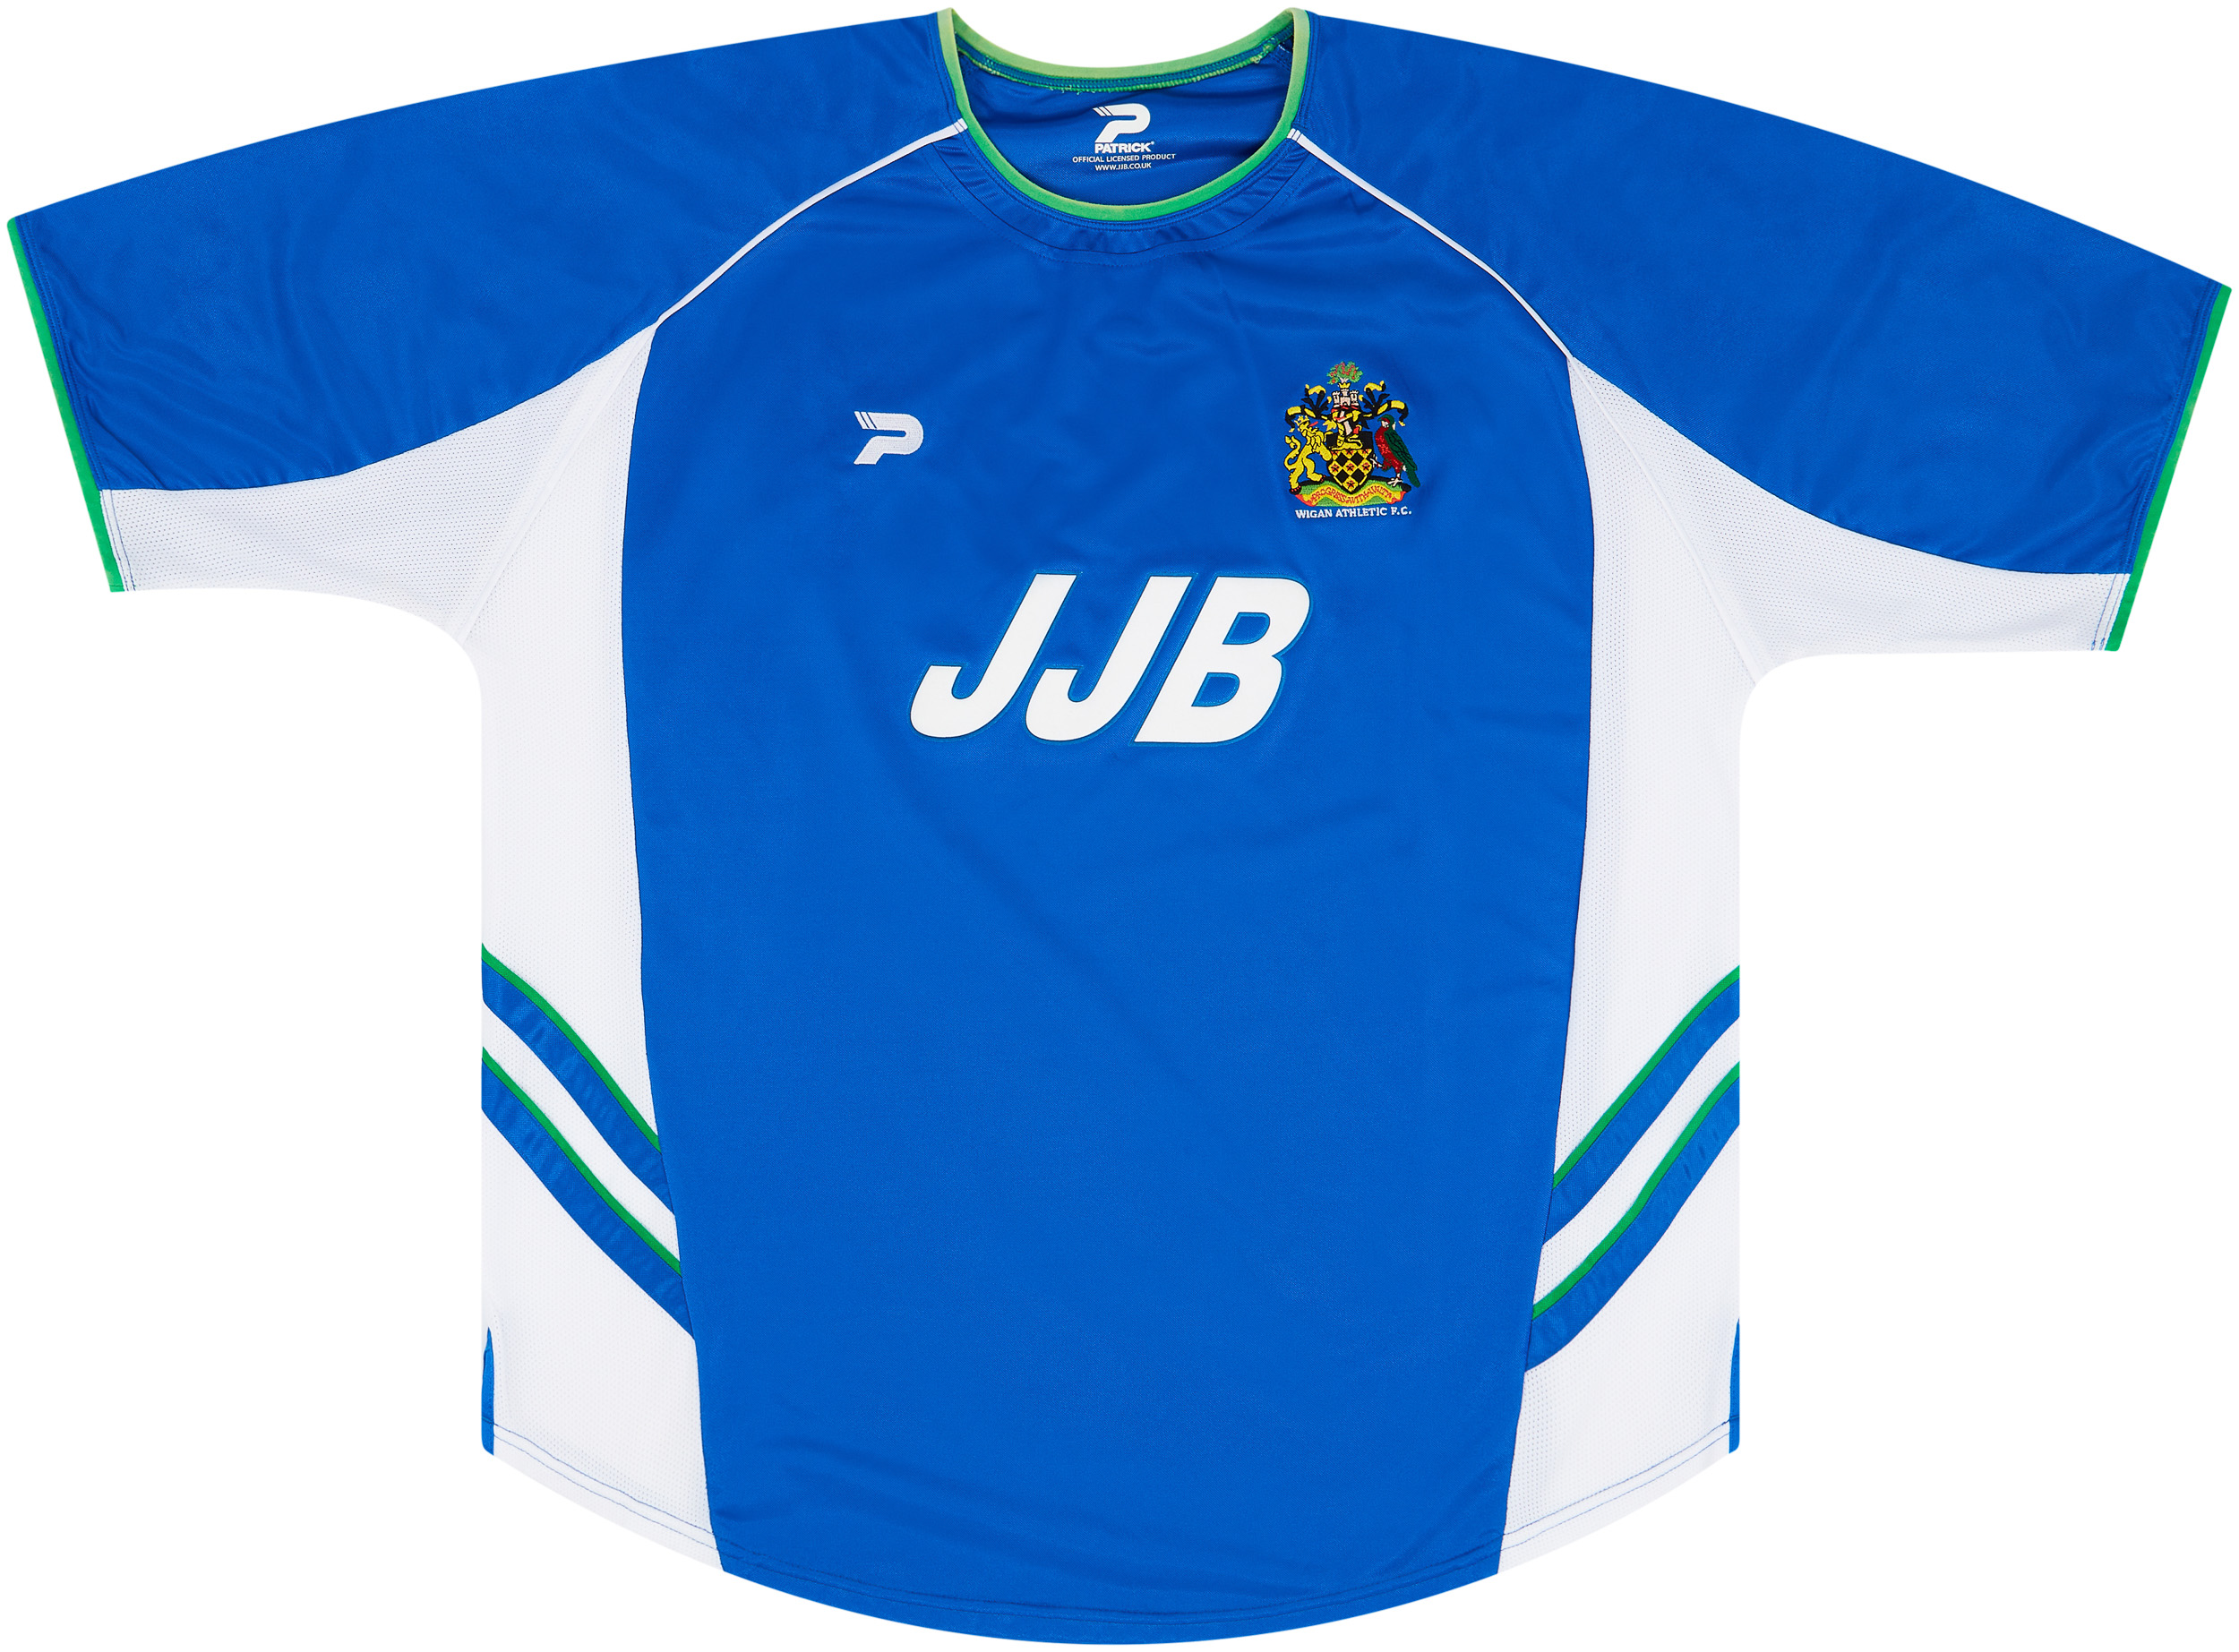 2002-03 Wigan Athletic Home Shirt - 10/10 - ()